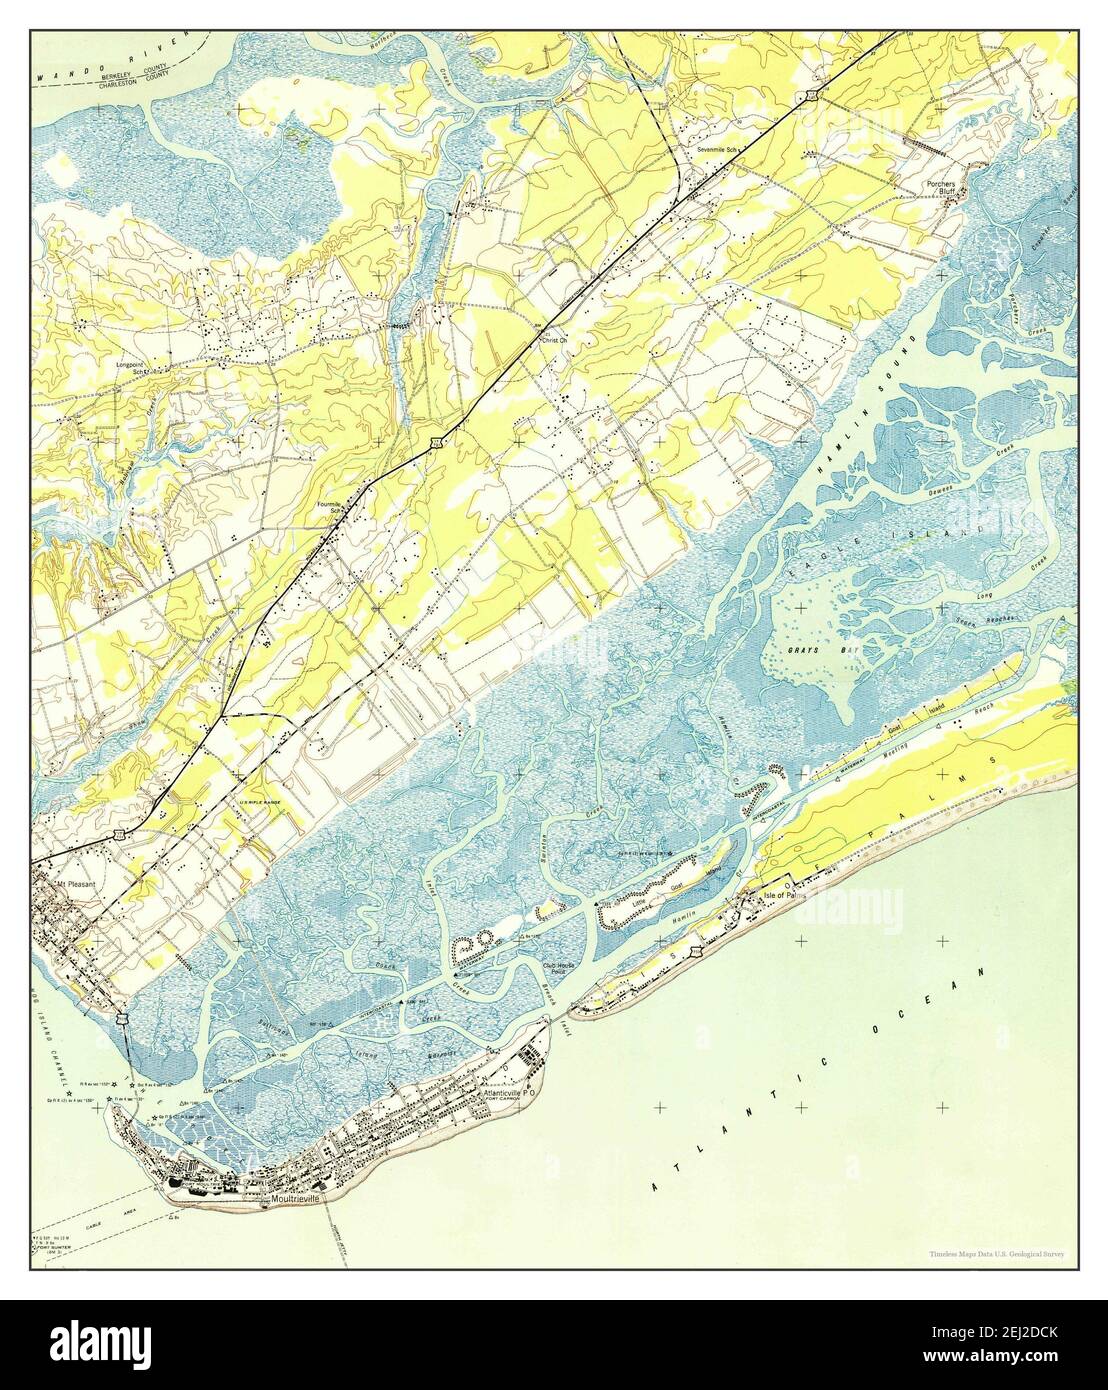 Fort Moultrie, South Carolina, map 1943, 1:24000, United States of America by Timeless Maps, data U.S. Geological Survey Stock Photo